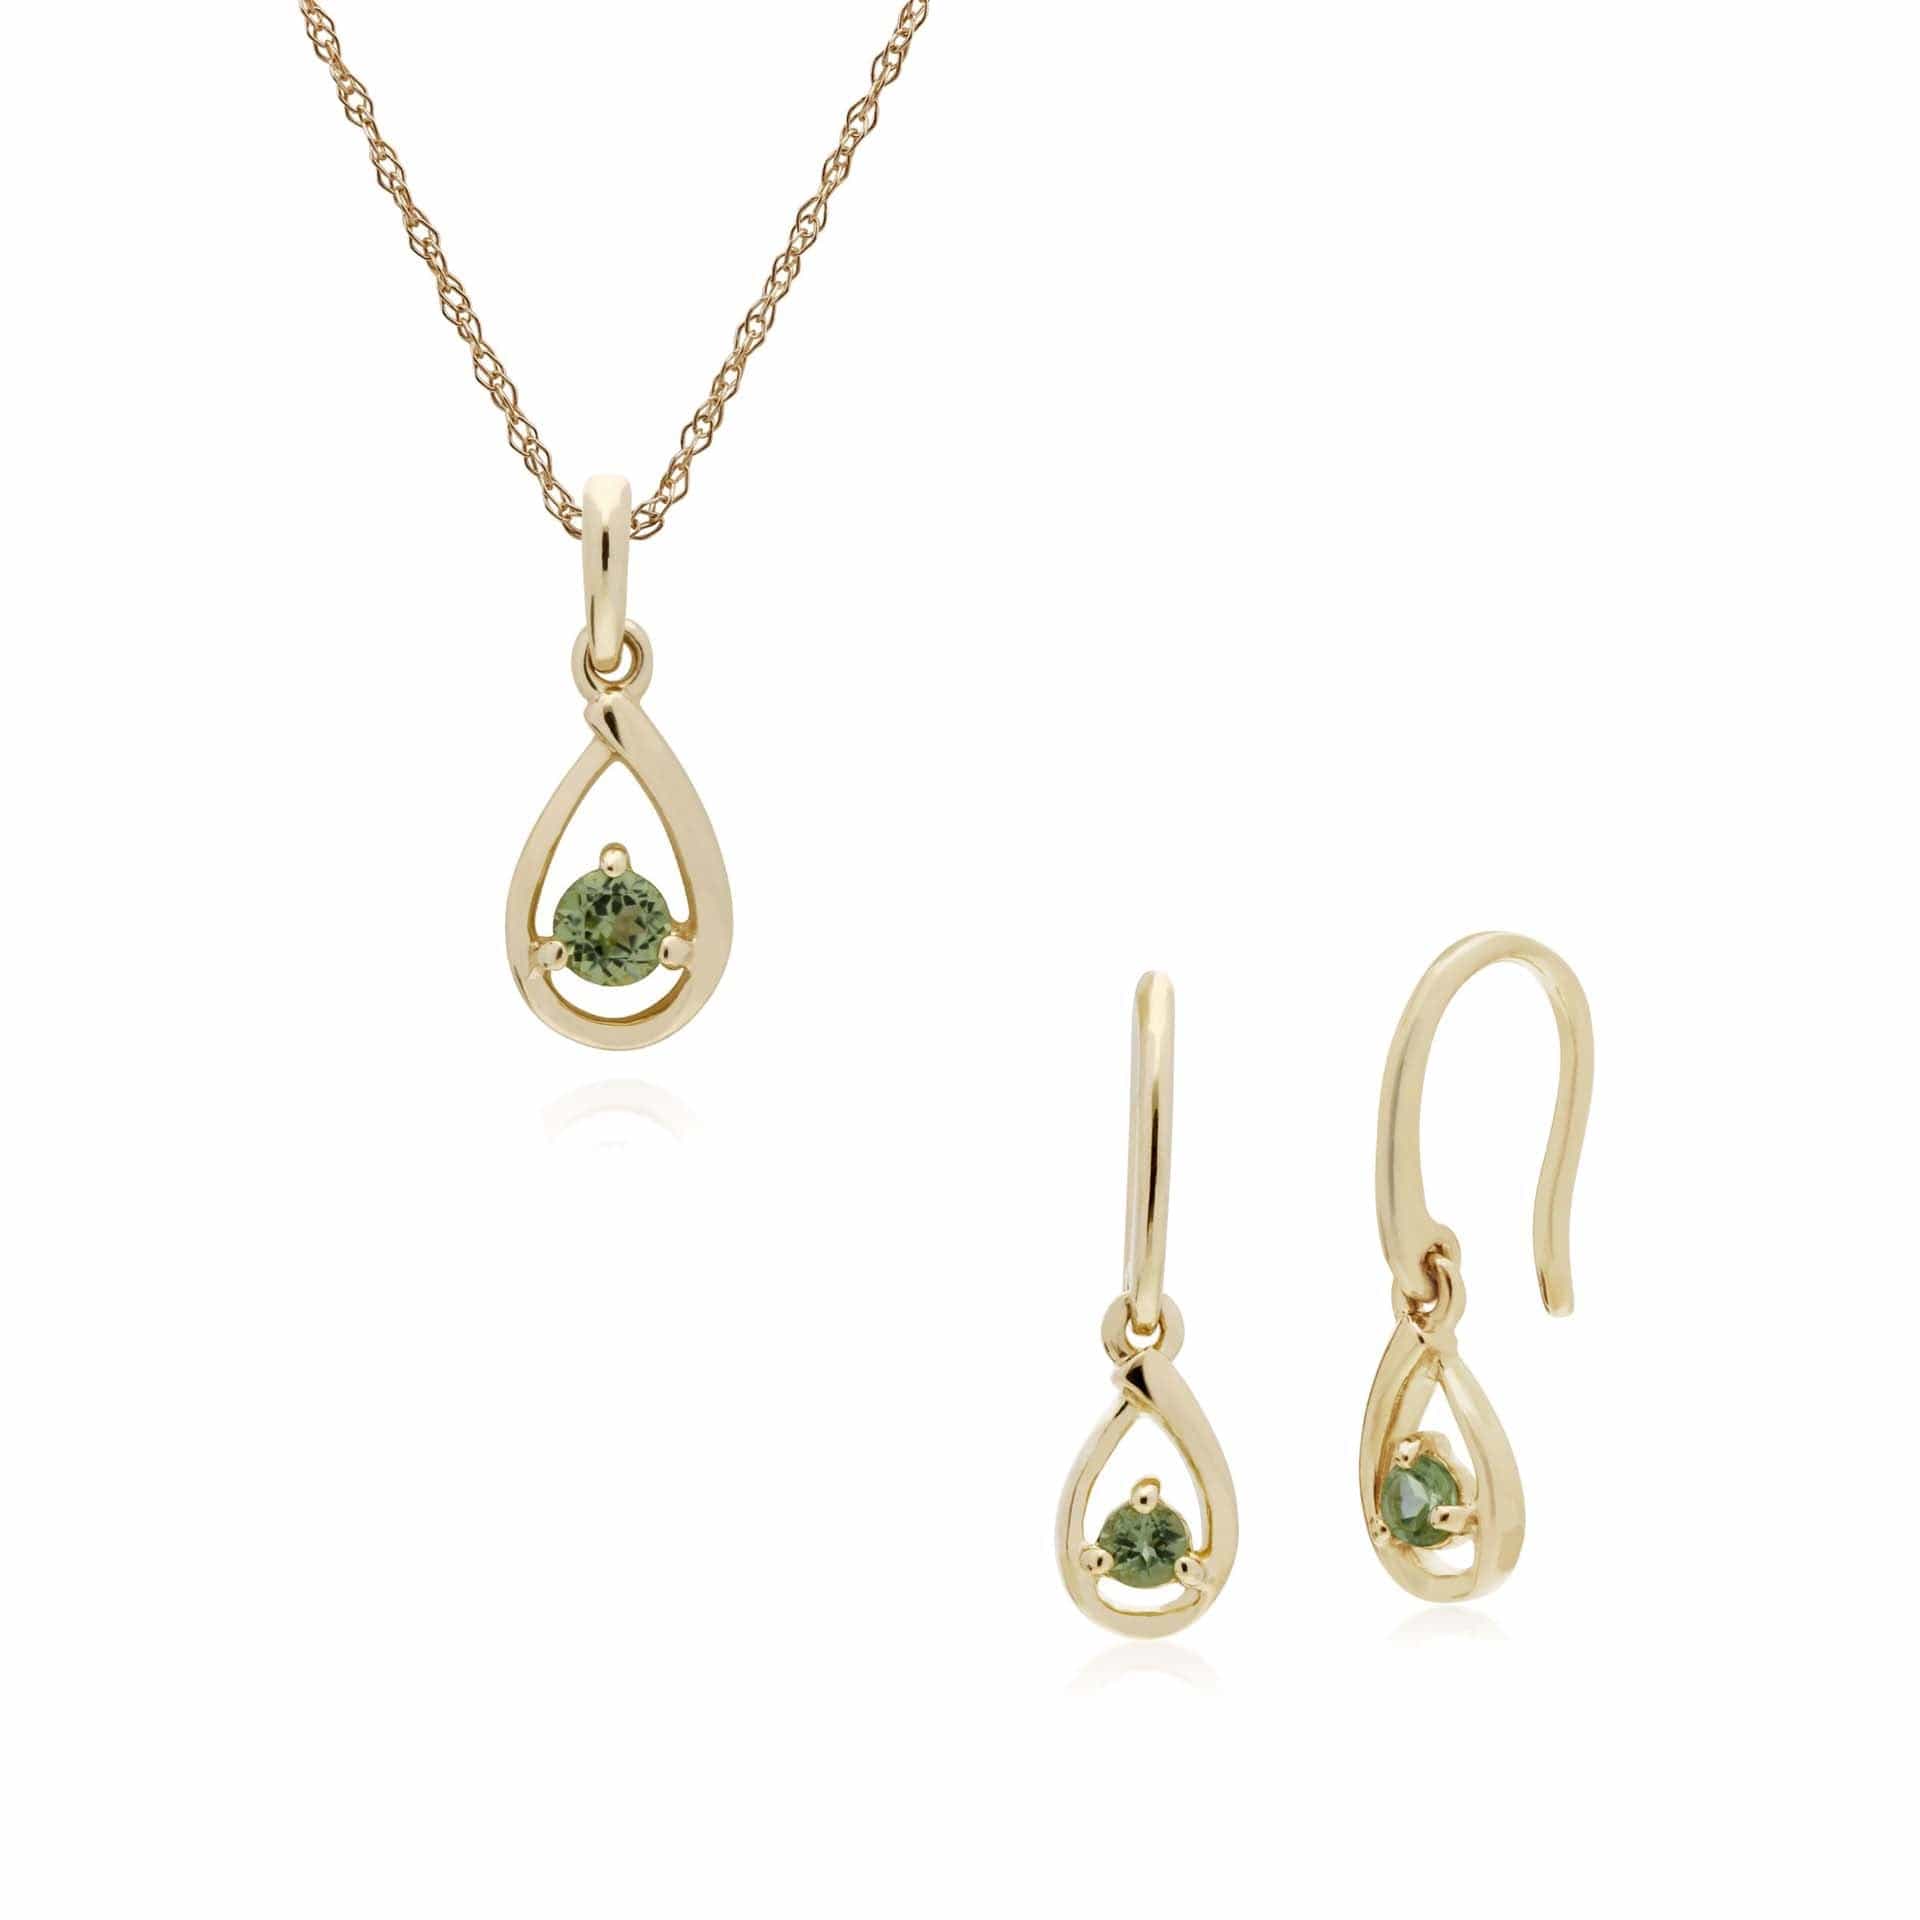 135E1190069-135P1551069 Classic Round Peridot Single Stone Tear Drop Earrings & Necklace Set in 9ct Yellow Gold 1